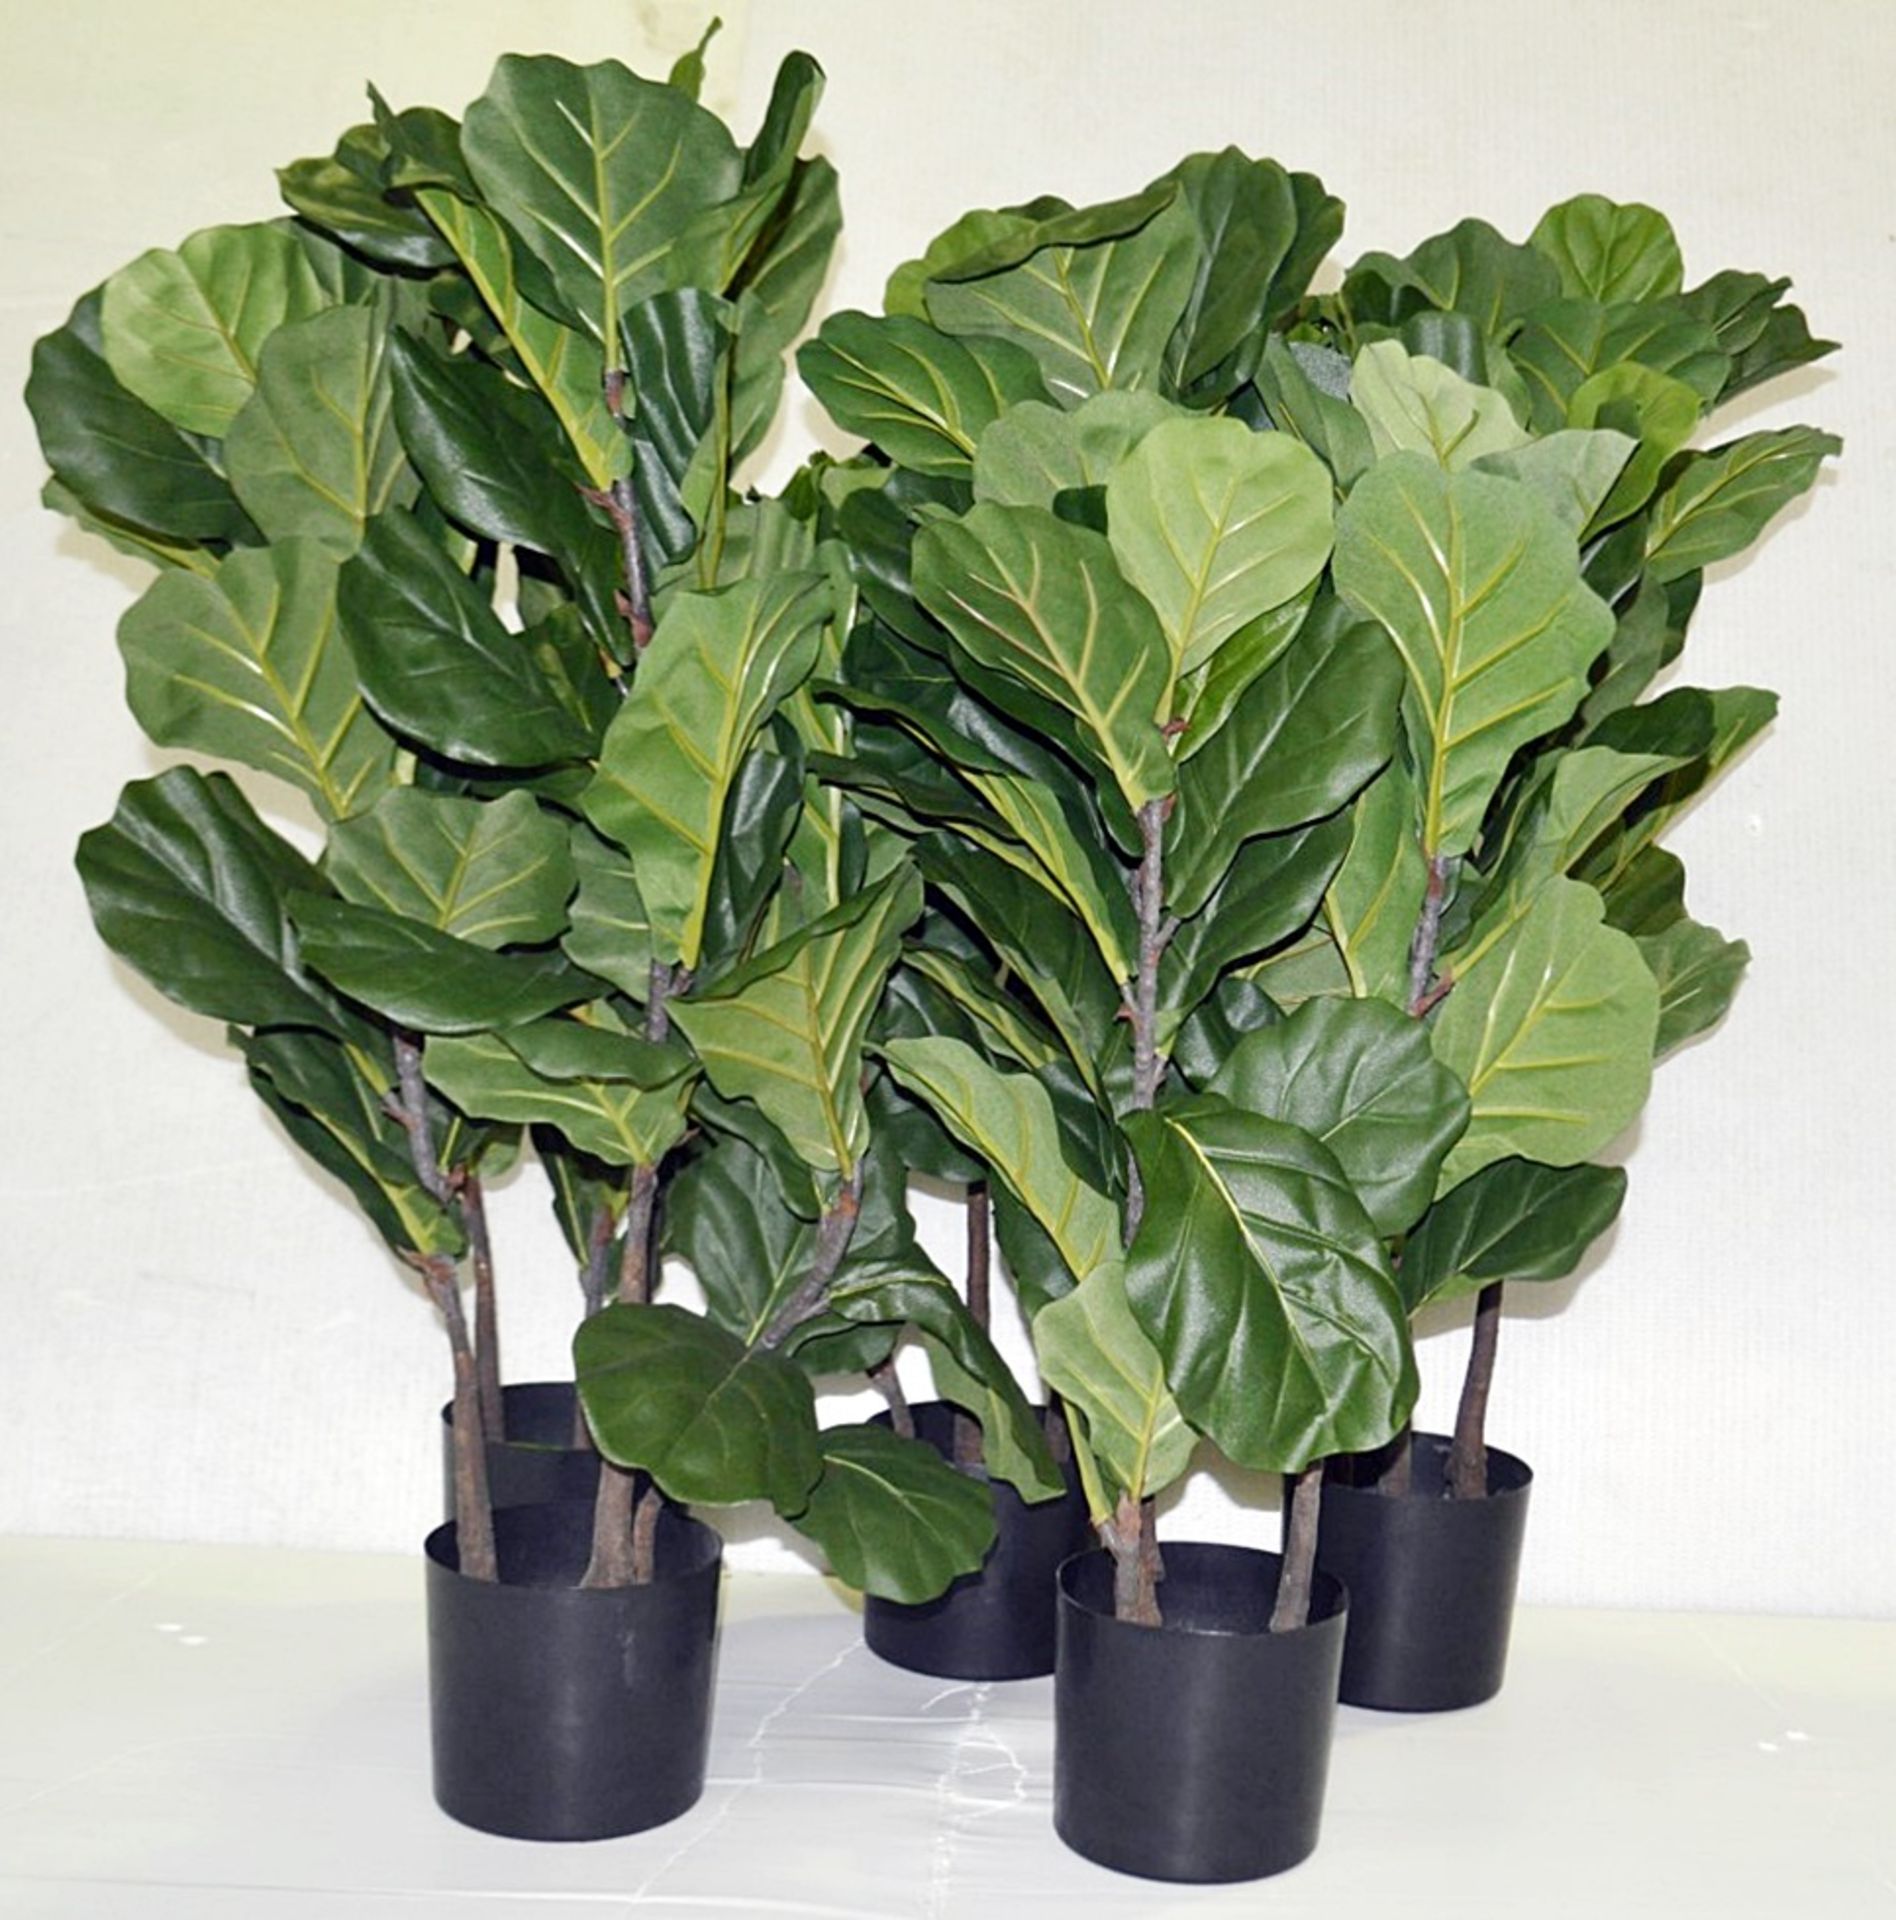 5 x Commercial Artificial Medium Sized Potted Plants - Dimensions (approx): H94 x W50cm - Ex-